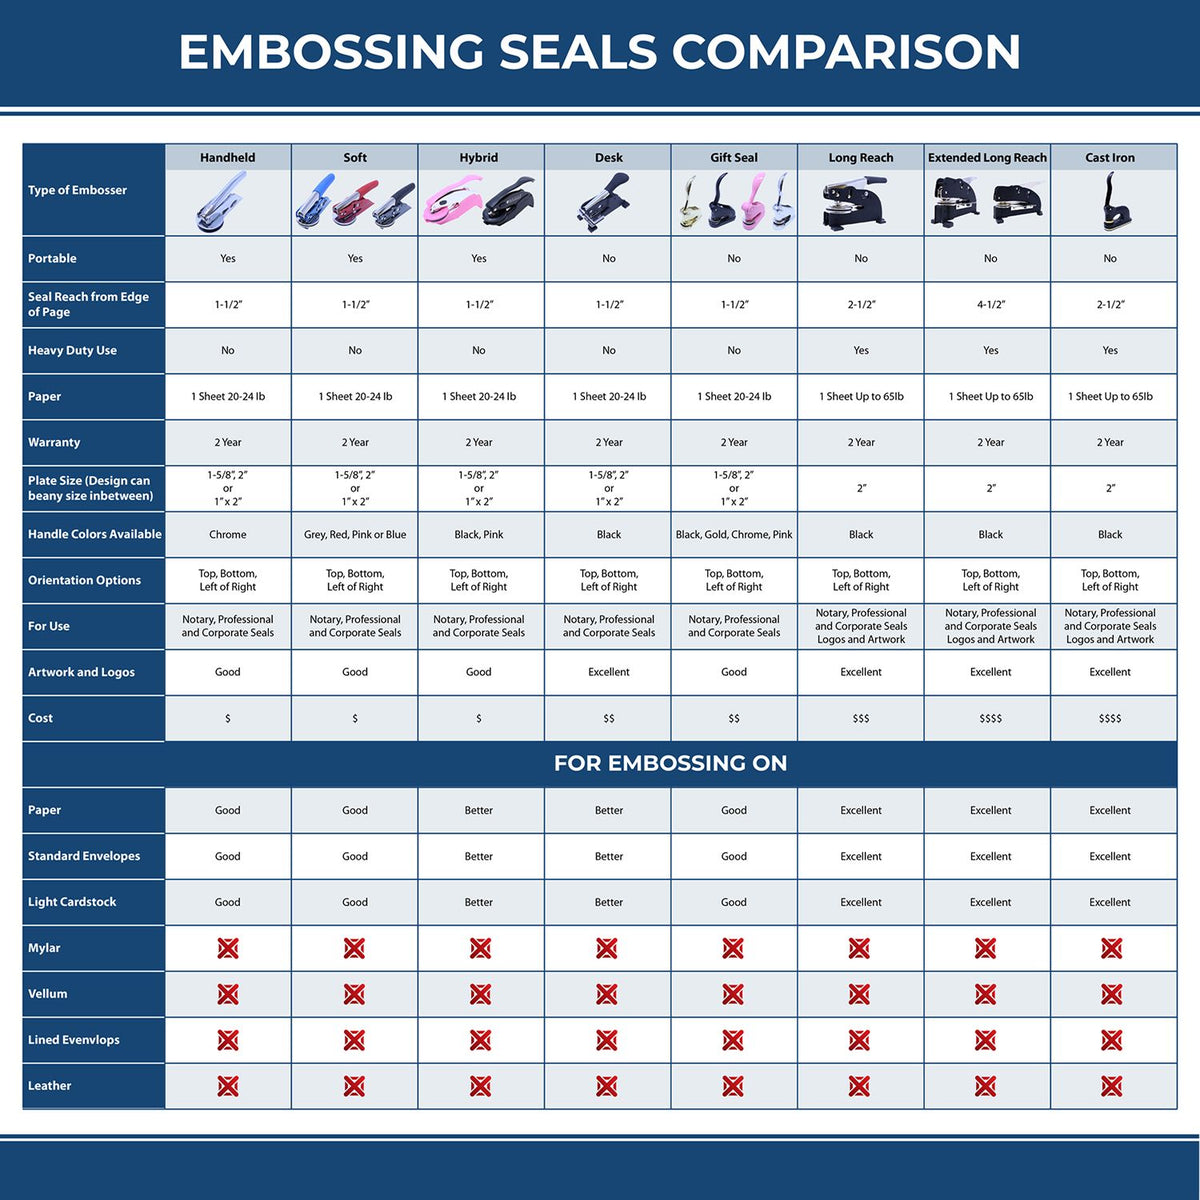 A comparison chart for the different types of mount models available for the Extended Long Reach Maryland Surveyor Embosser.